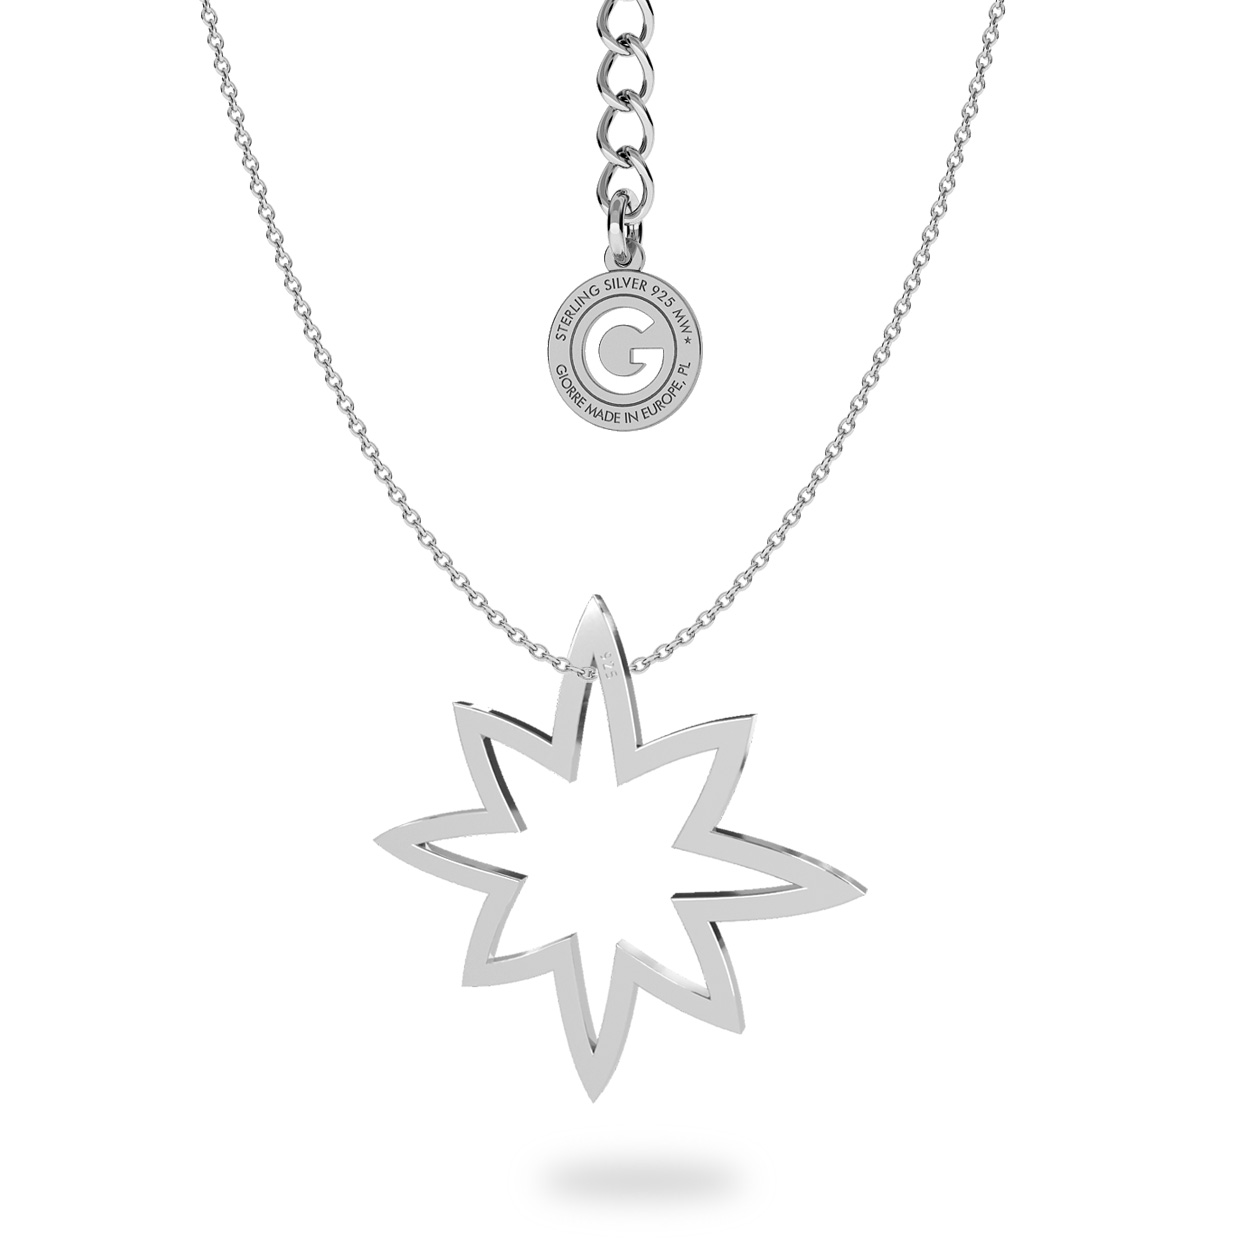 Giorre Woman's Necklace 33027